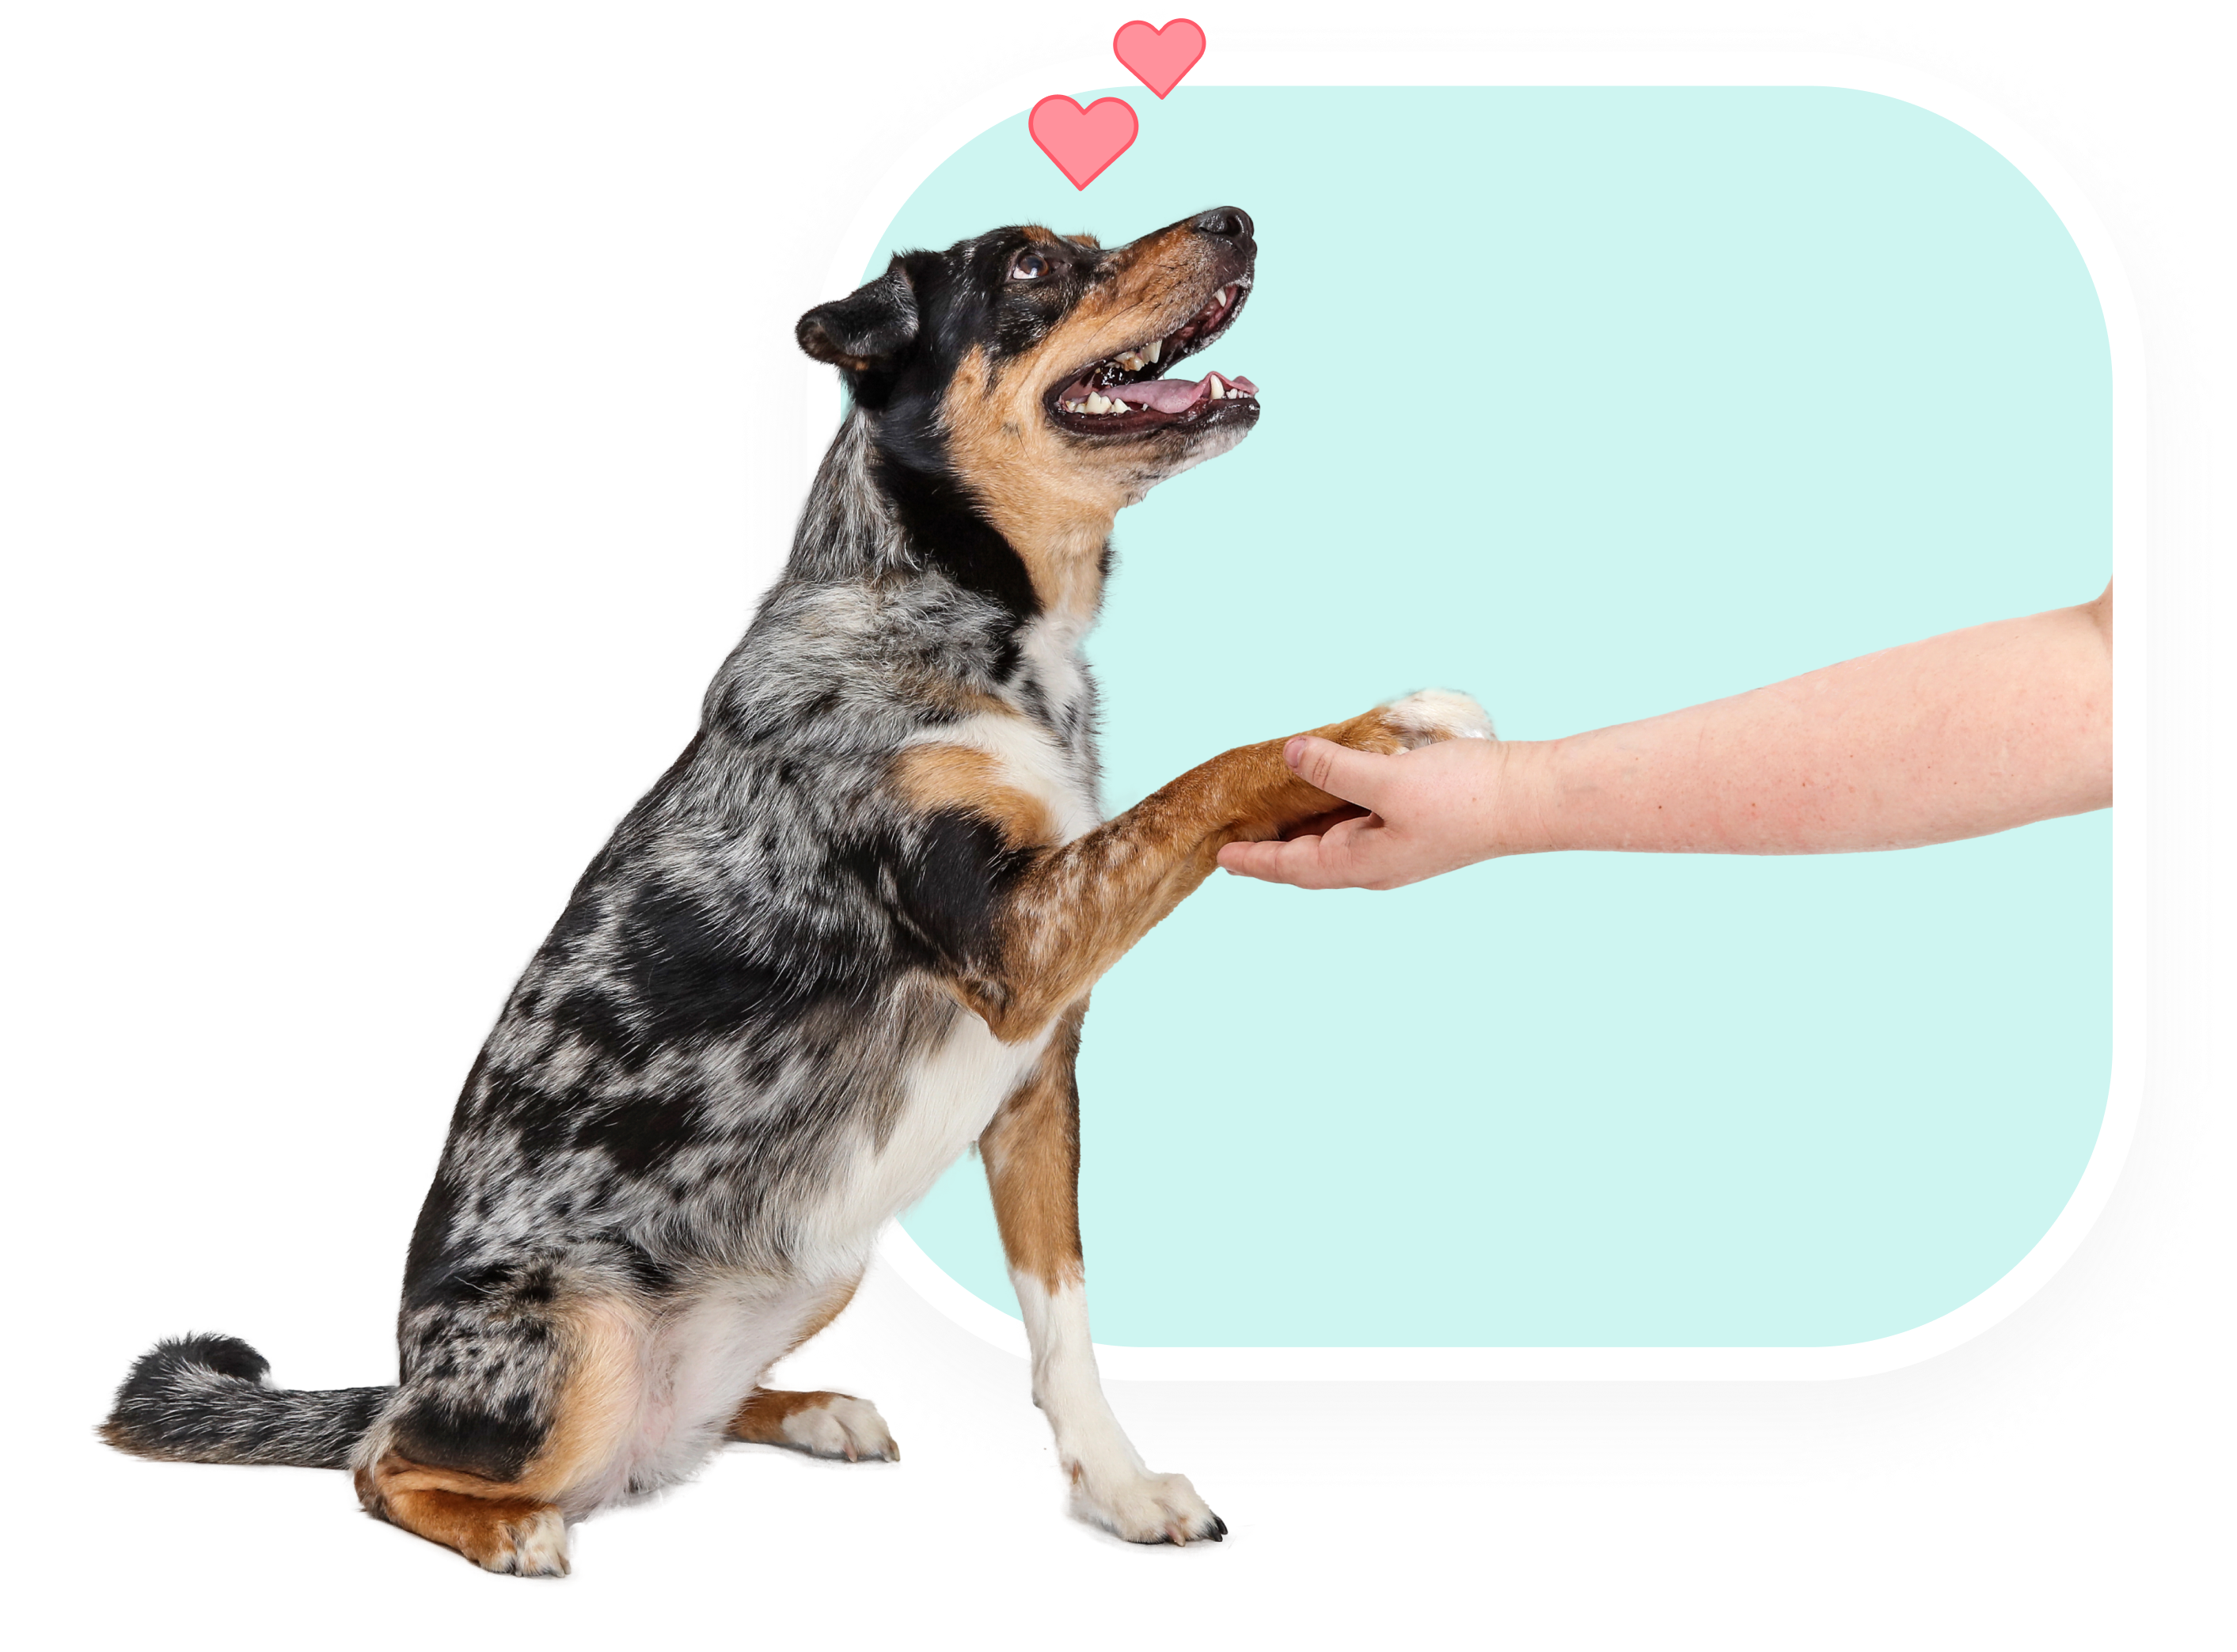 Dog stretching its paw out. A human hand holding the dogs paw.